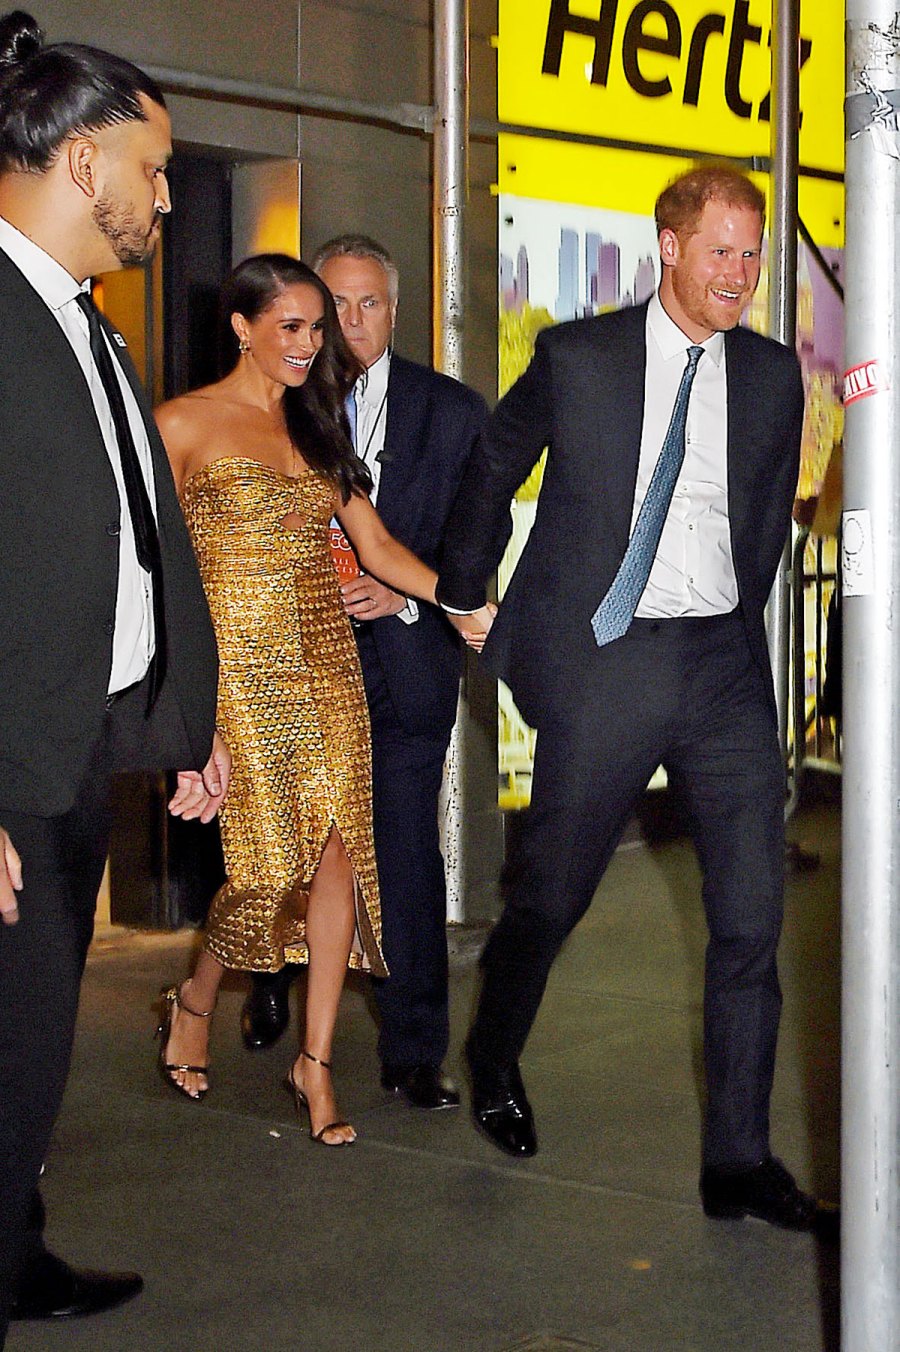 Making a Statement Meghan Markle Stuns in a Golden Gown at the 2023 Women of Vision Awards With Husband Prince Harry and Mom Doria Ragland 2